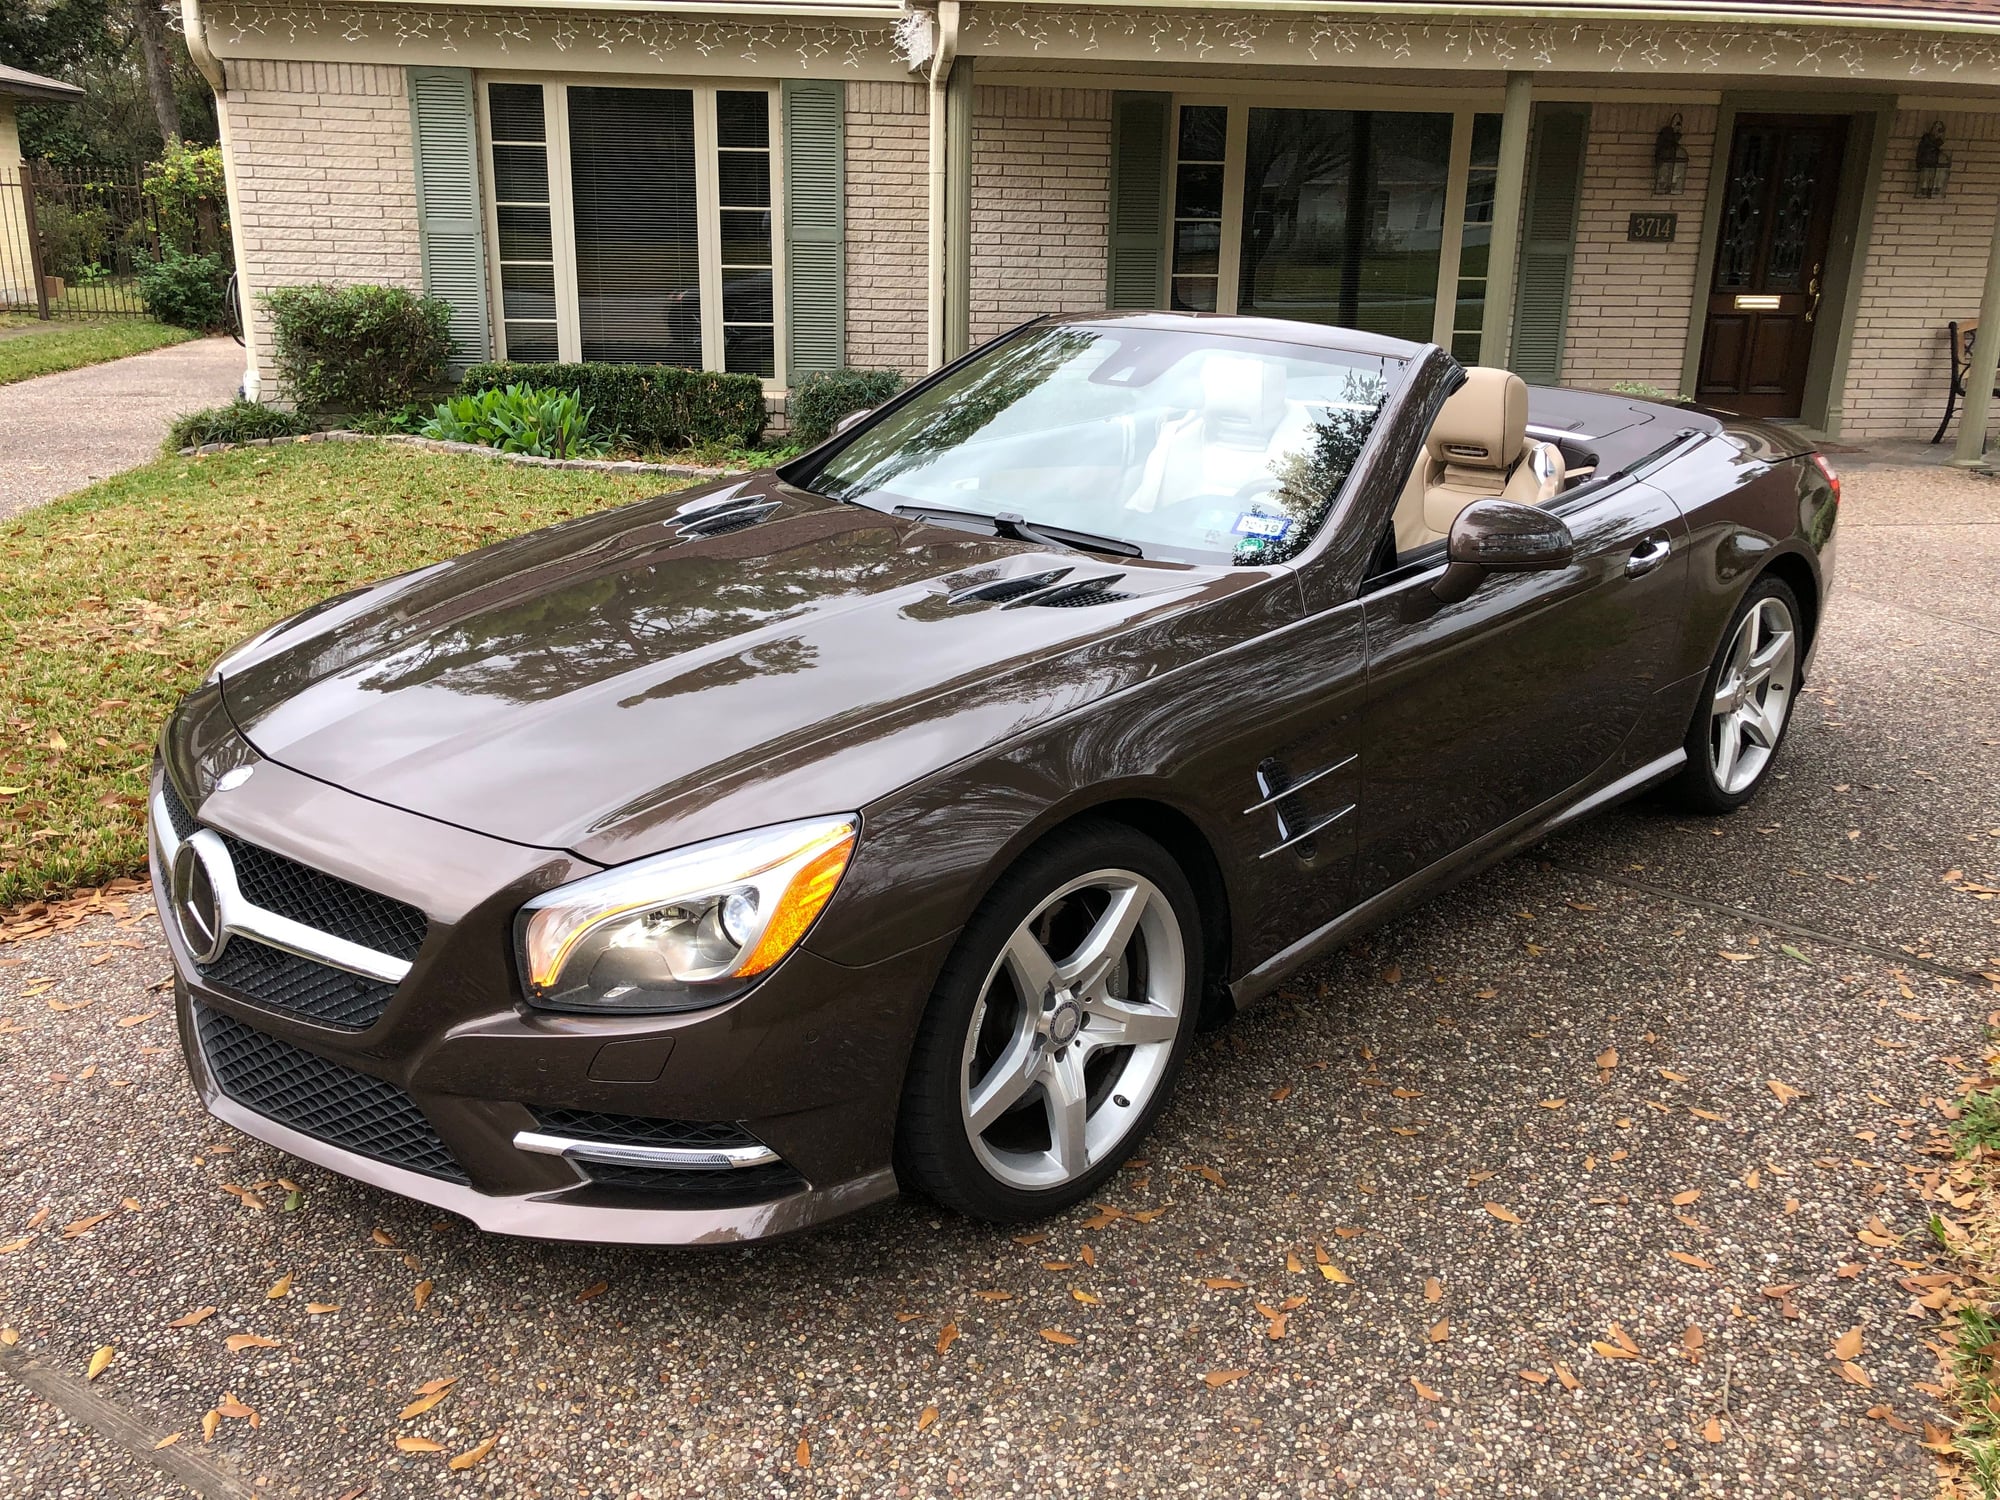 2013 Mercedes-Benz SL550 - 2013 SL550 with CPO warranty, very low miles, loaded with options, rare color combo - Used - VIN WDDJK7DA7DF016702 - 13,700 Miles - 8 cyl - 2WD - Automatic - Convertible - Brown - Houston, TX 77008, United States